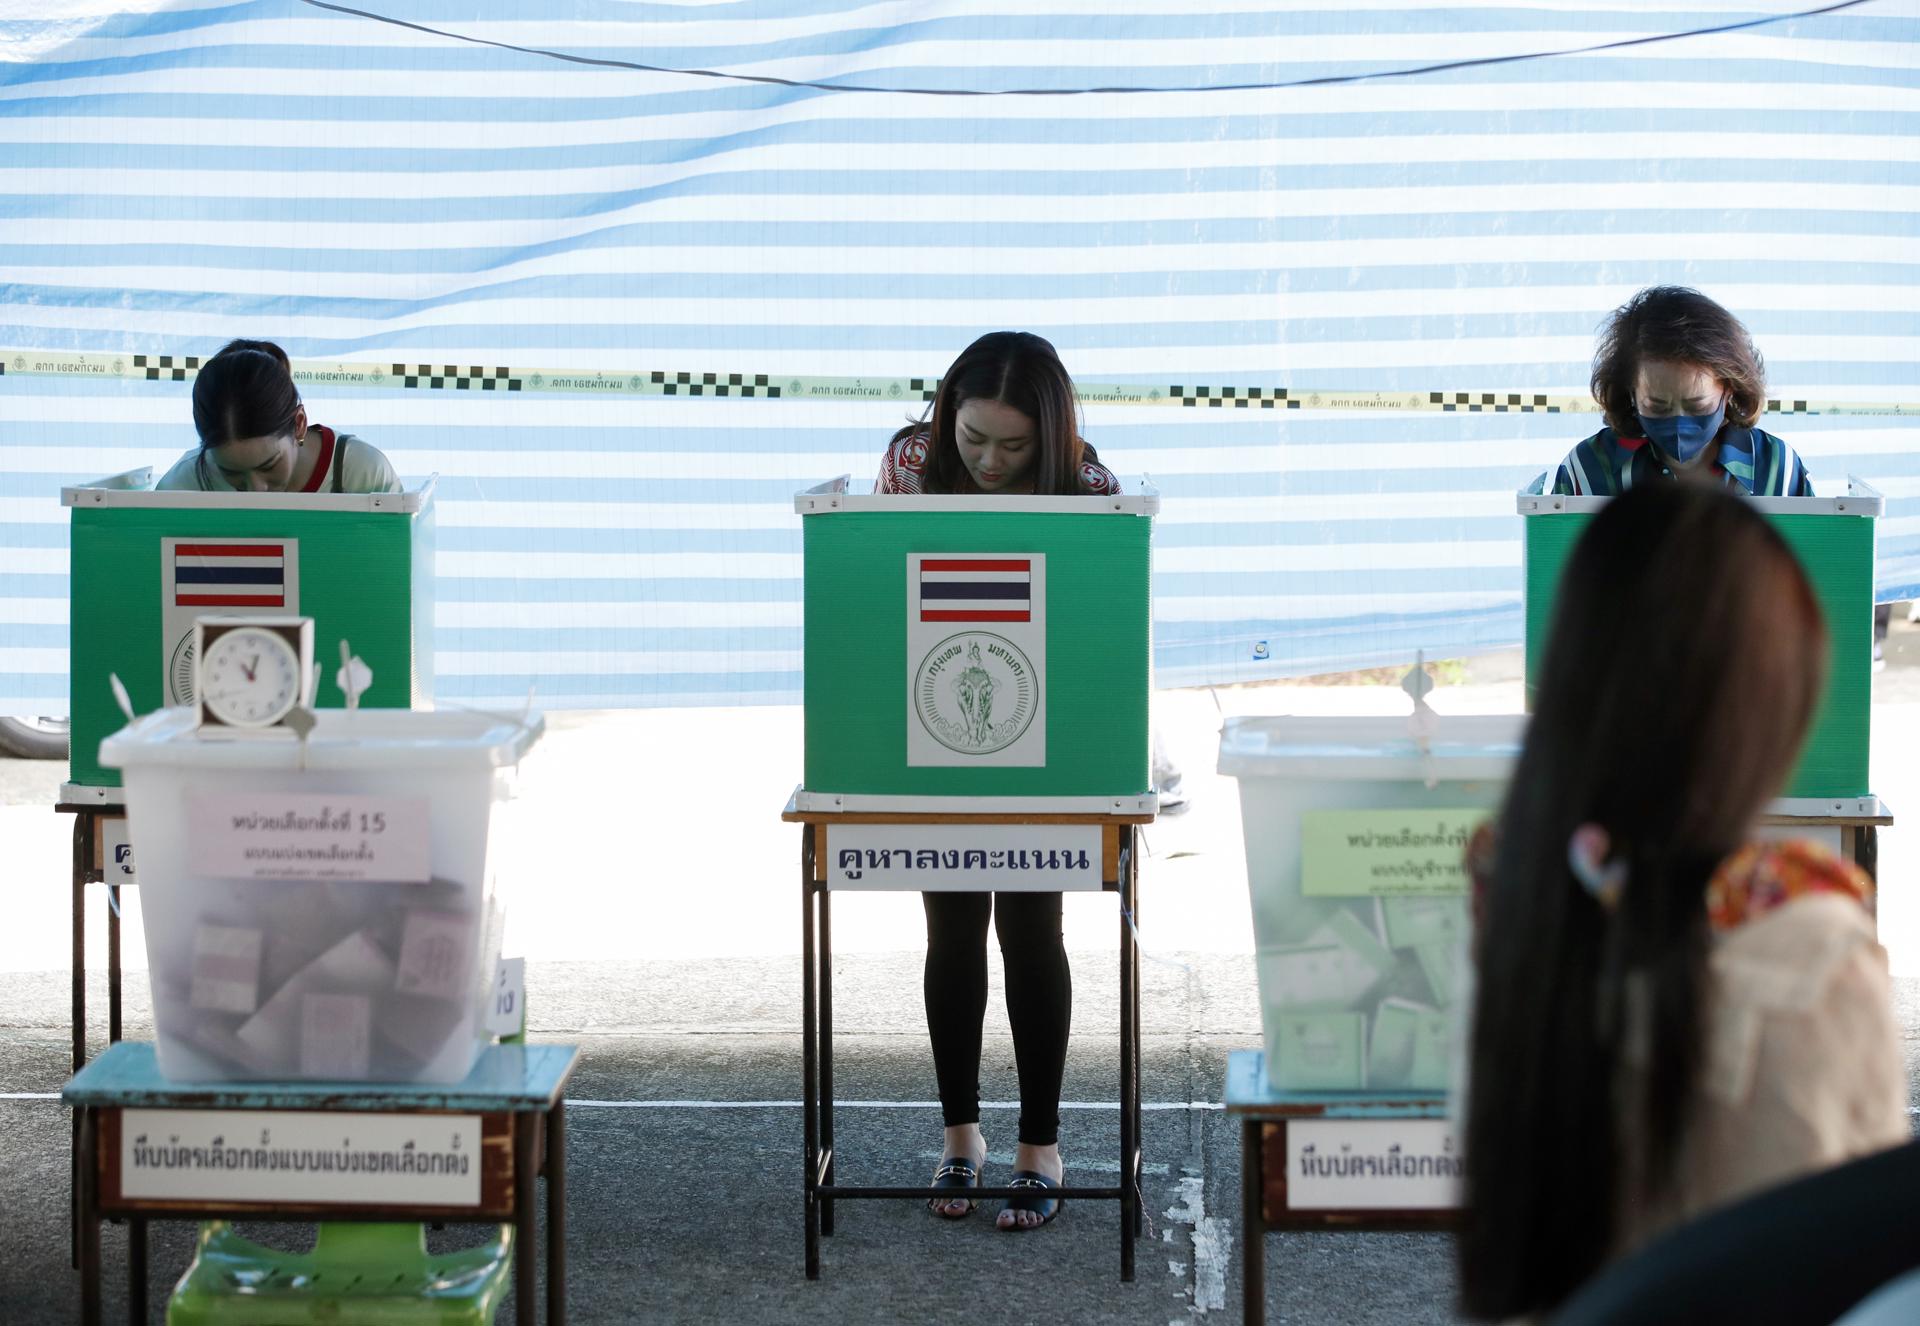 Pheu Thai Party's Prime Ministerial candidate Paetongtarn Shinawatra (C) accompanied with her mother Potjaman Na Pombejra (R) and her older sister Pintongta Shinawatra (L) cast ballots during the general election at a polling station in Bangkok, Thailand, 14 May 2023. EFE-EPA/RUNGROJ YONGRIT
